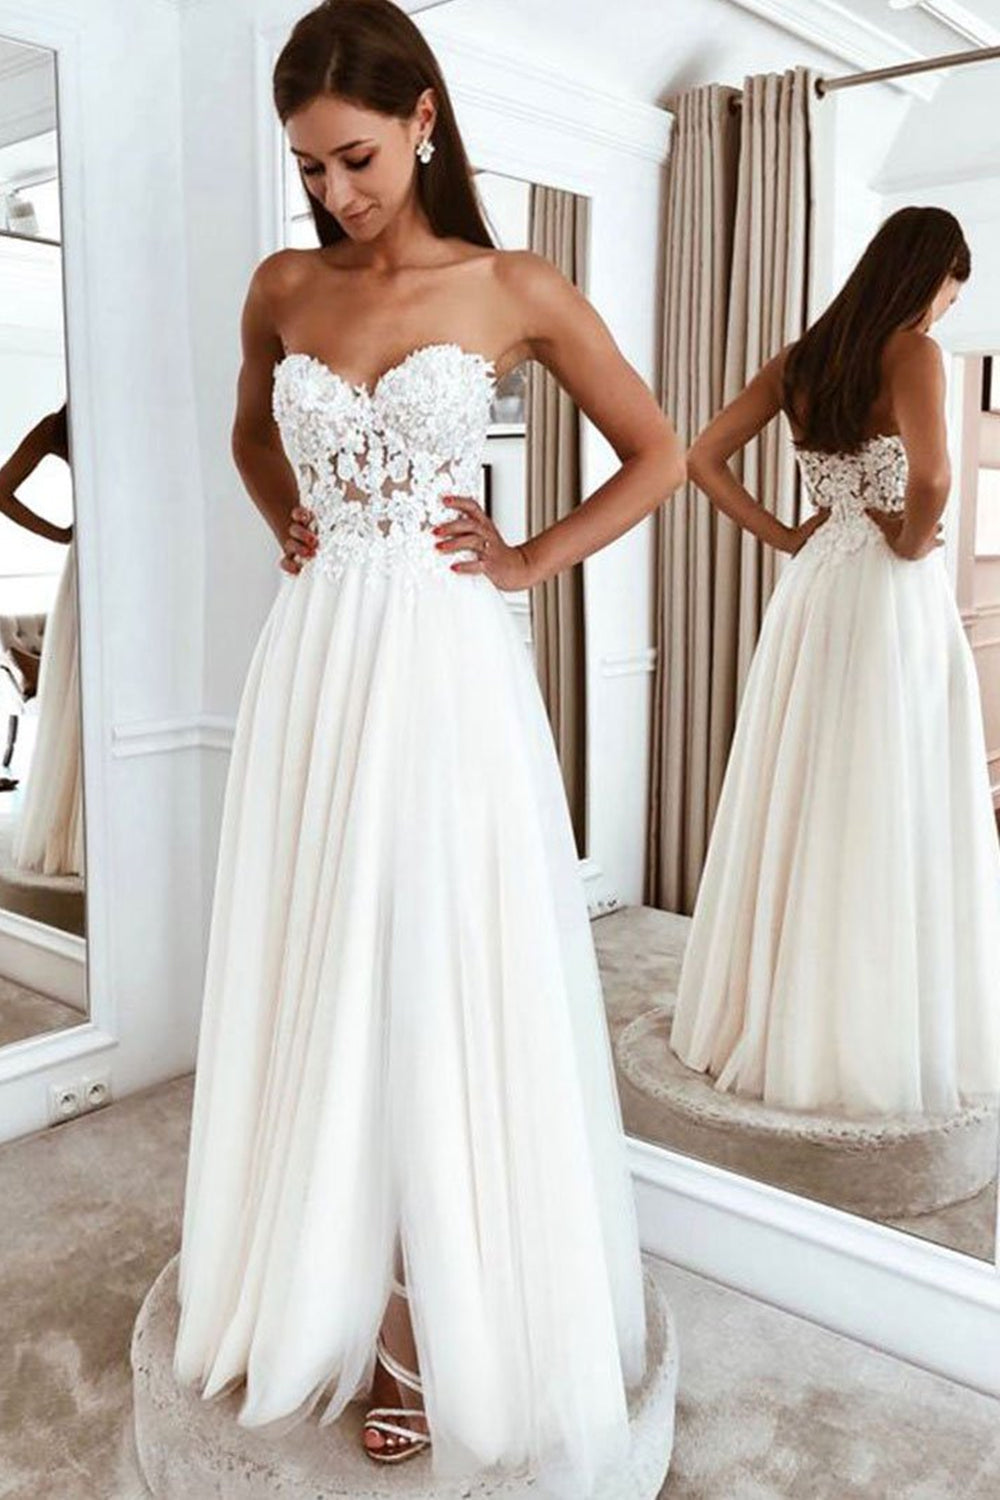 Strapless Sweetheart Neck White Lace Long Prom Dresses, White Lace Formal Graduation Evening Dresses